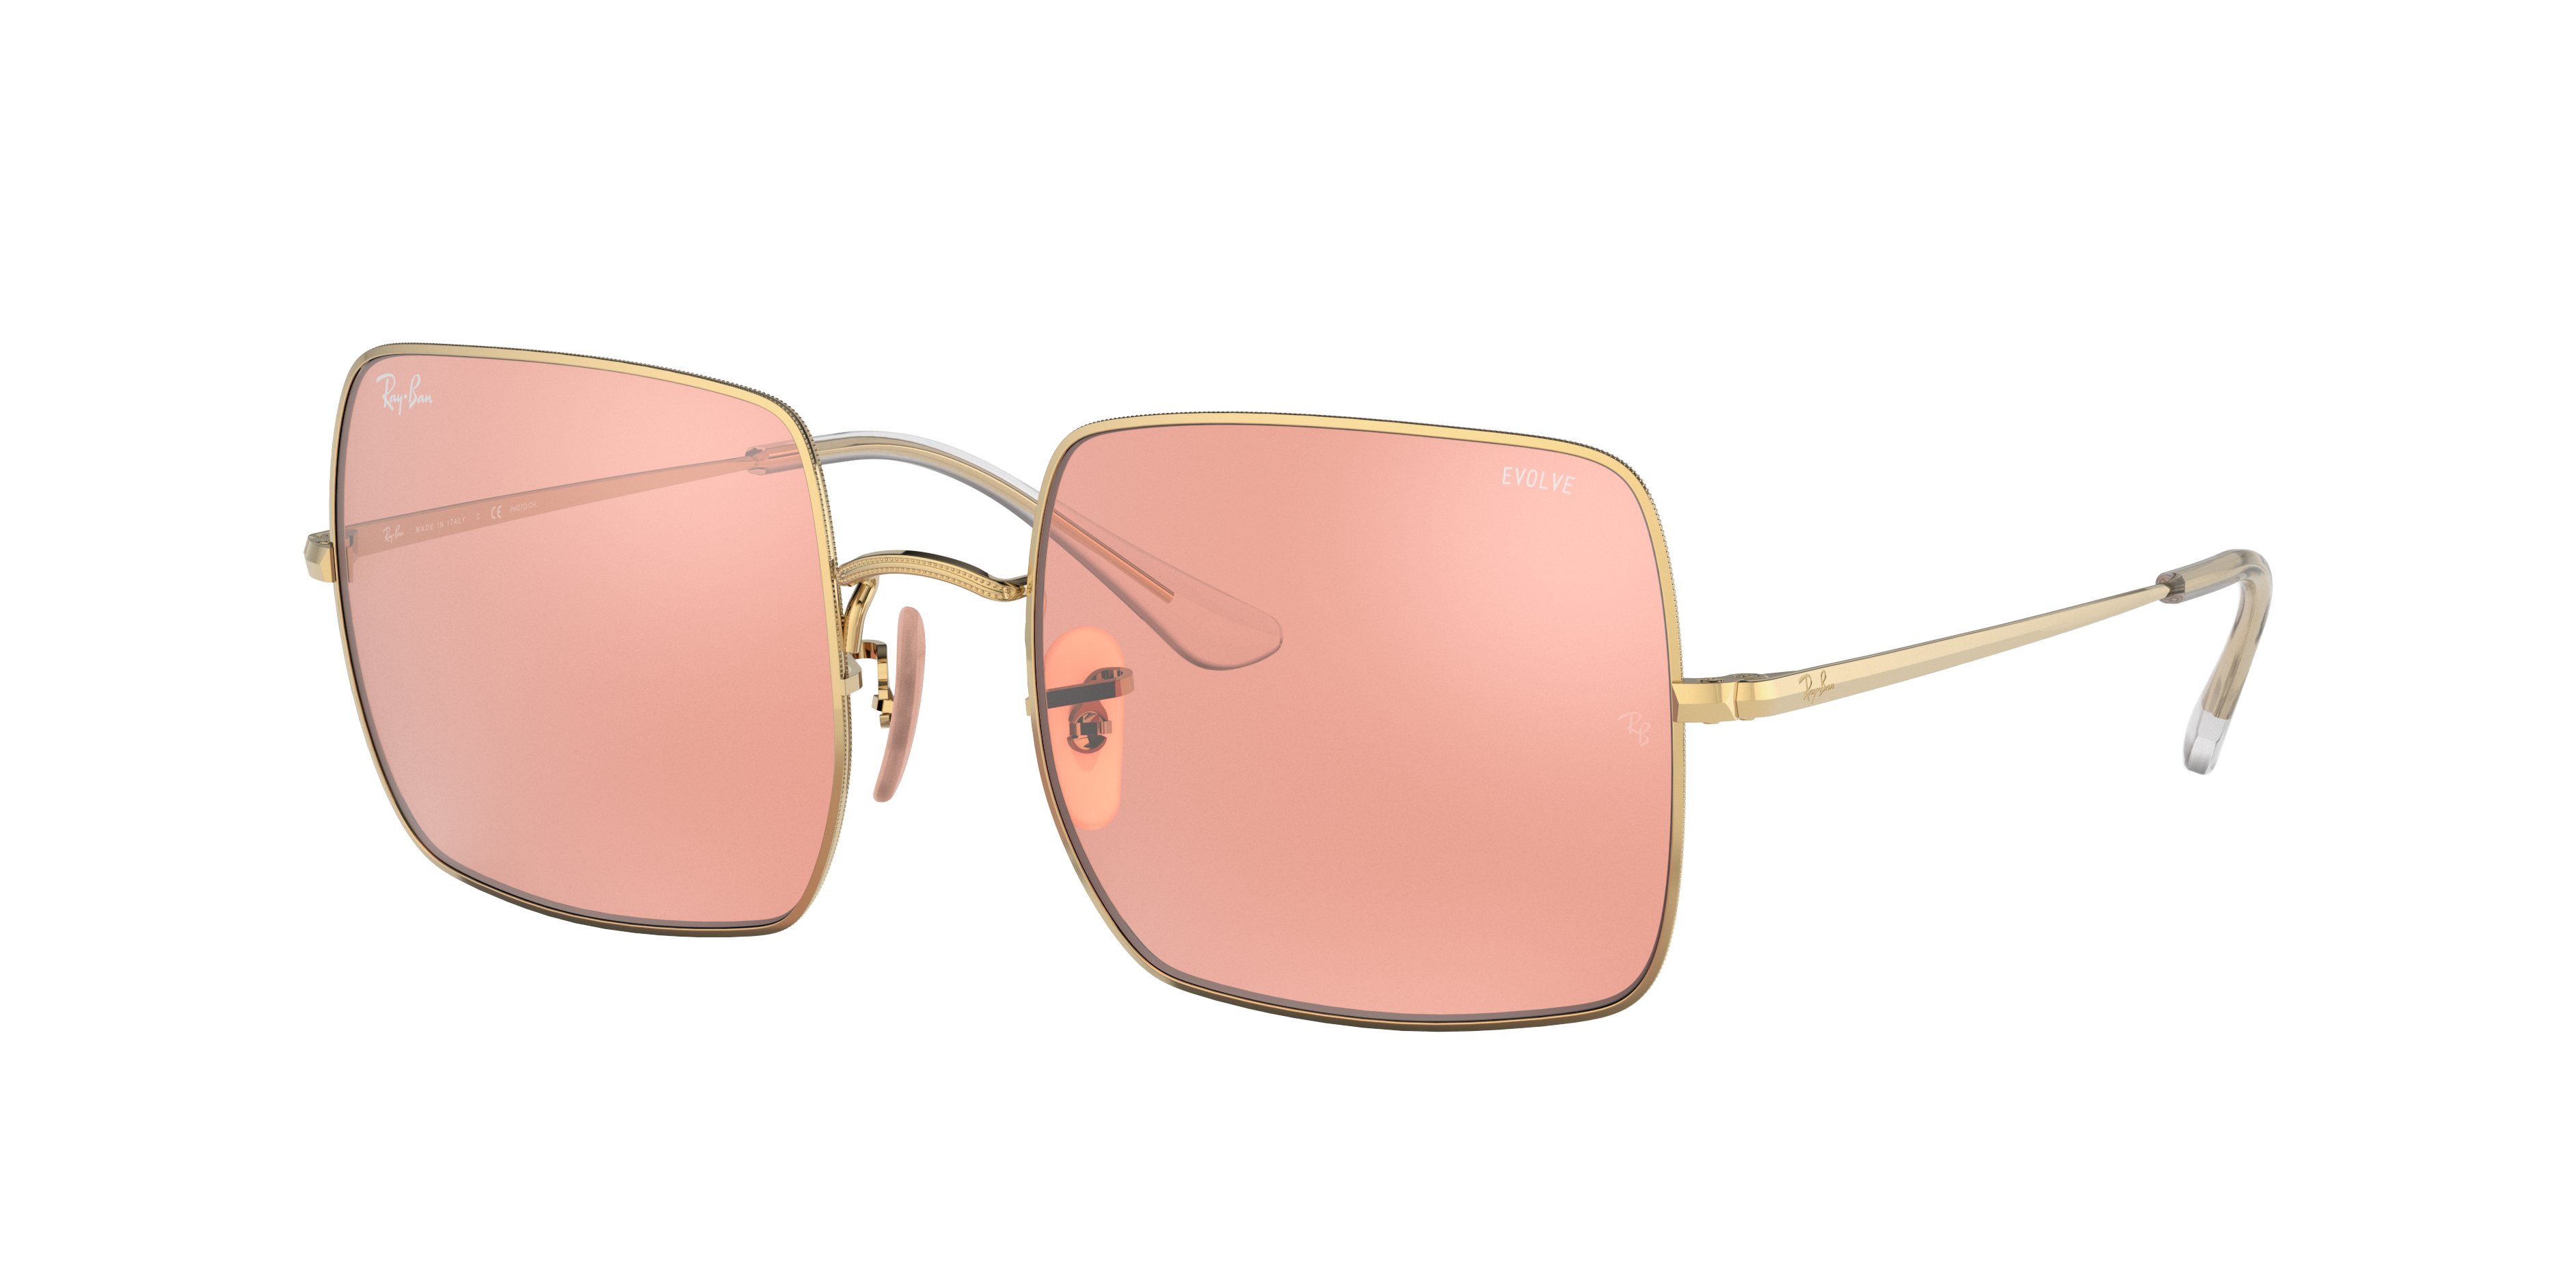 Mus Cloud Portrayal Square 1971 Mirror Evolve Sunglasses in Gold and Pink Photochromic | Ray-Ban ®